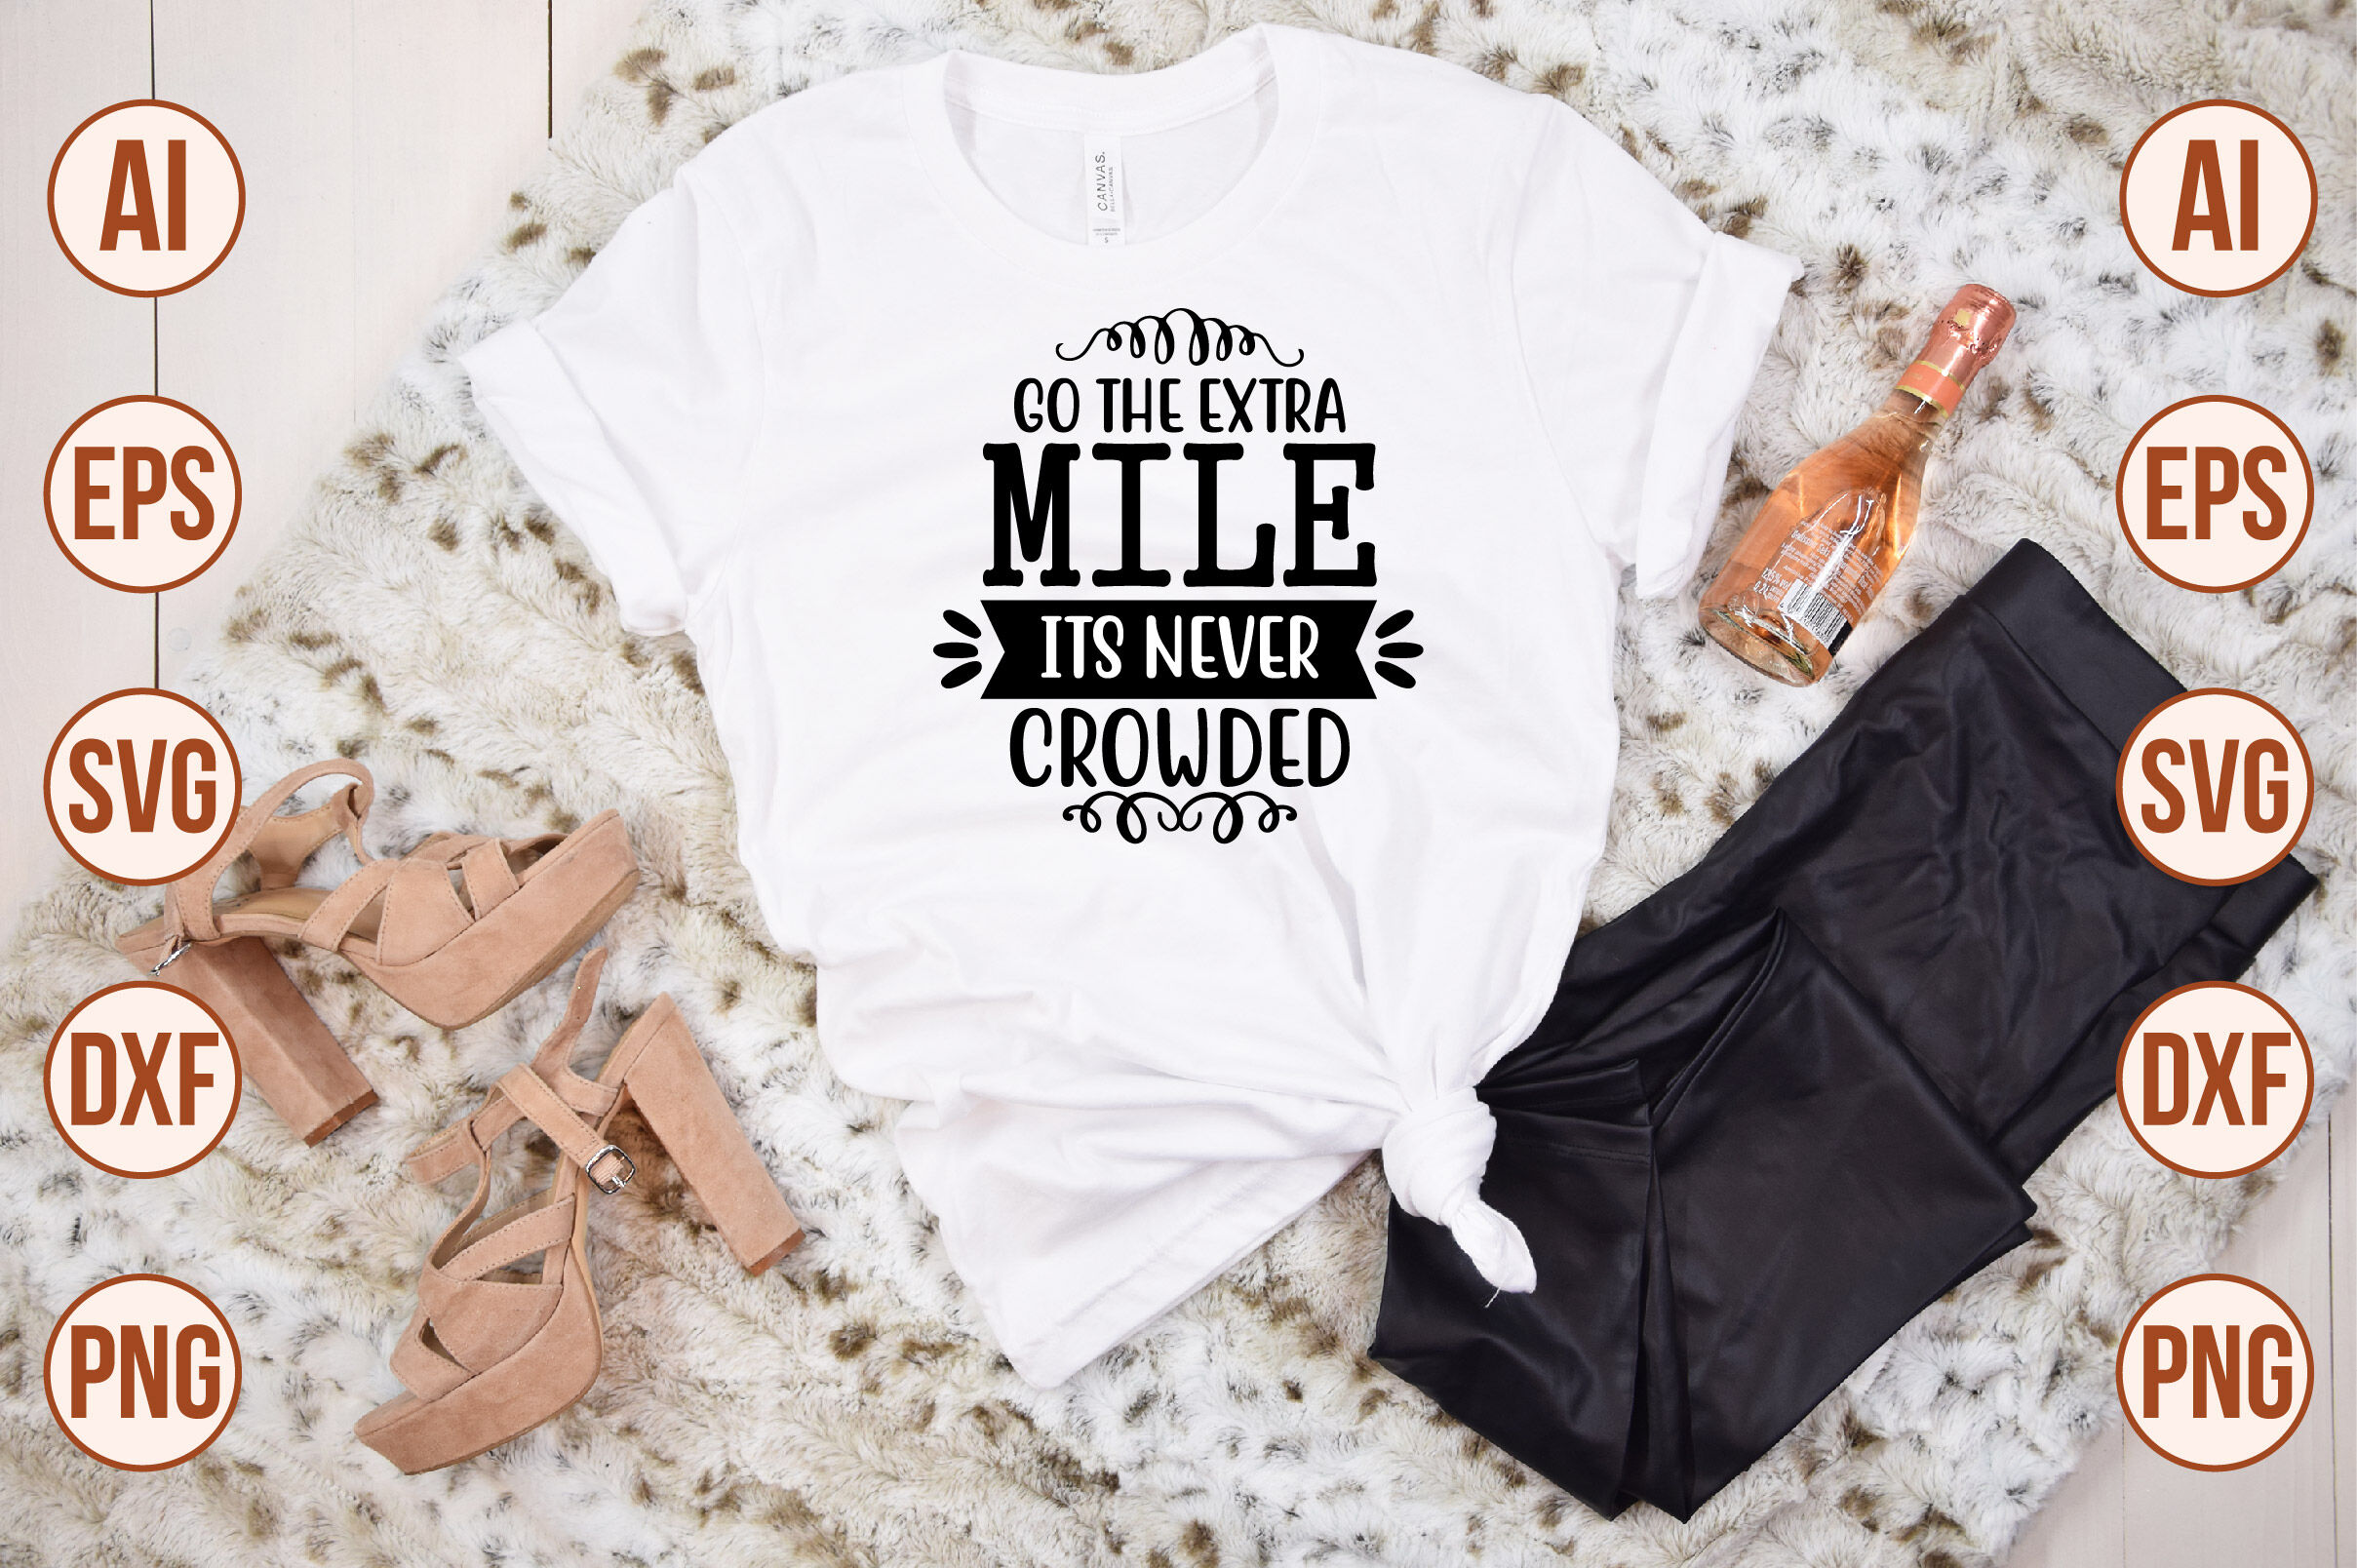 Go The Extra Mile Its Never Crowded Svg By Creativemim